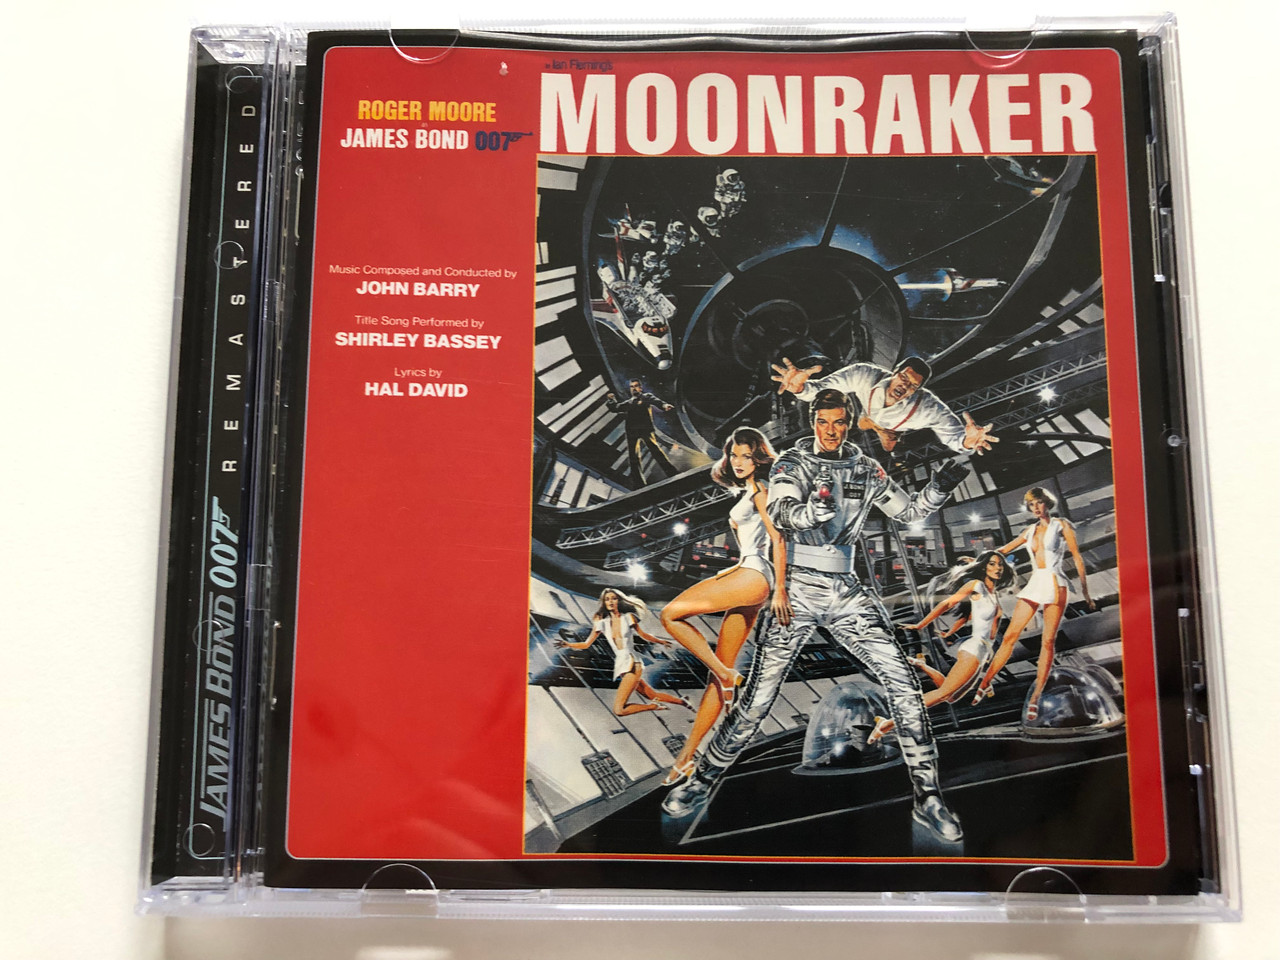 https://cdn10.bigcommerce.com/s-62bdpkt7pb/products/30863/images/182085/Moonraker_Roger_Moore_-_James_Bond_007_Music_Composed_and_Conducted_by_John_Barry_Title_Song_Performed_by_Shirley_Bassey_Lyrics_by_Hal_David_James_Bond_007_Remastered_Capitol_Records_Au_1__17469.1624291555.1280.1280.JPG?c=2